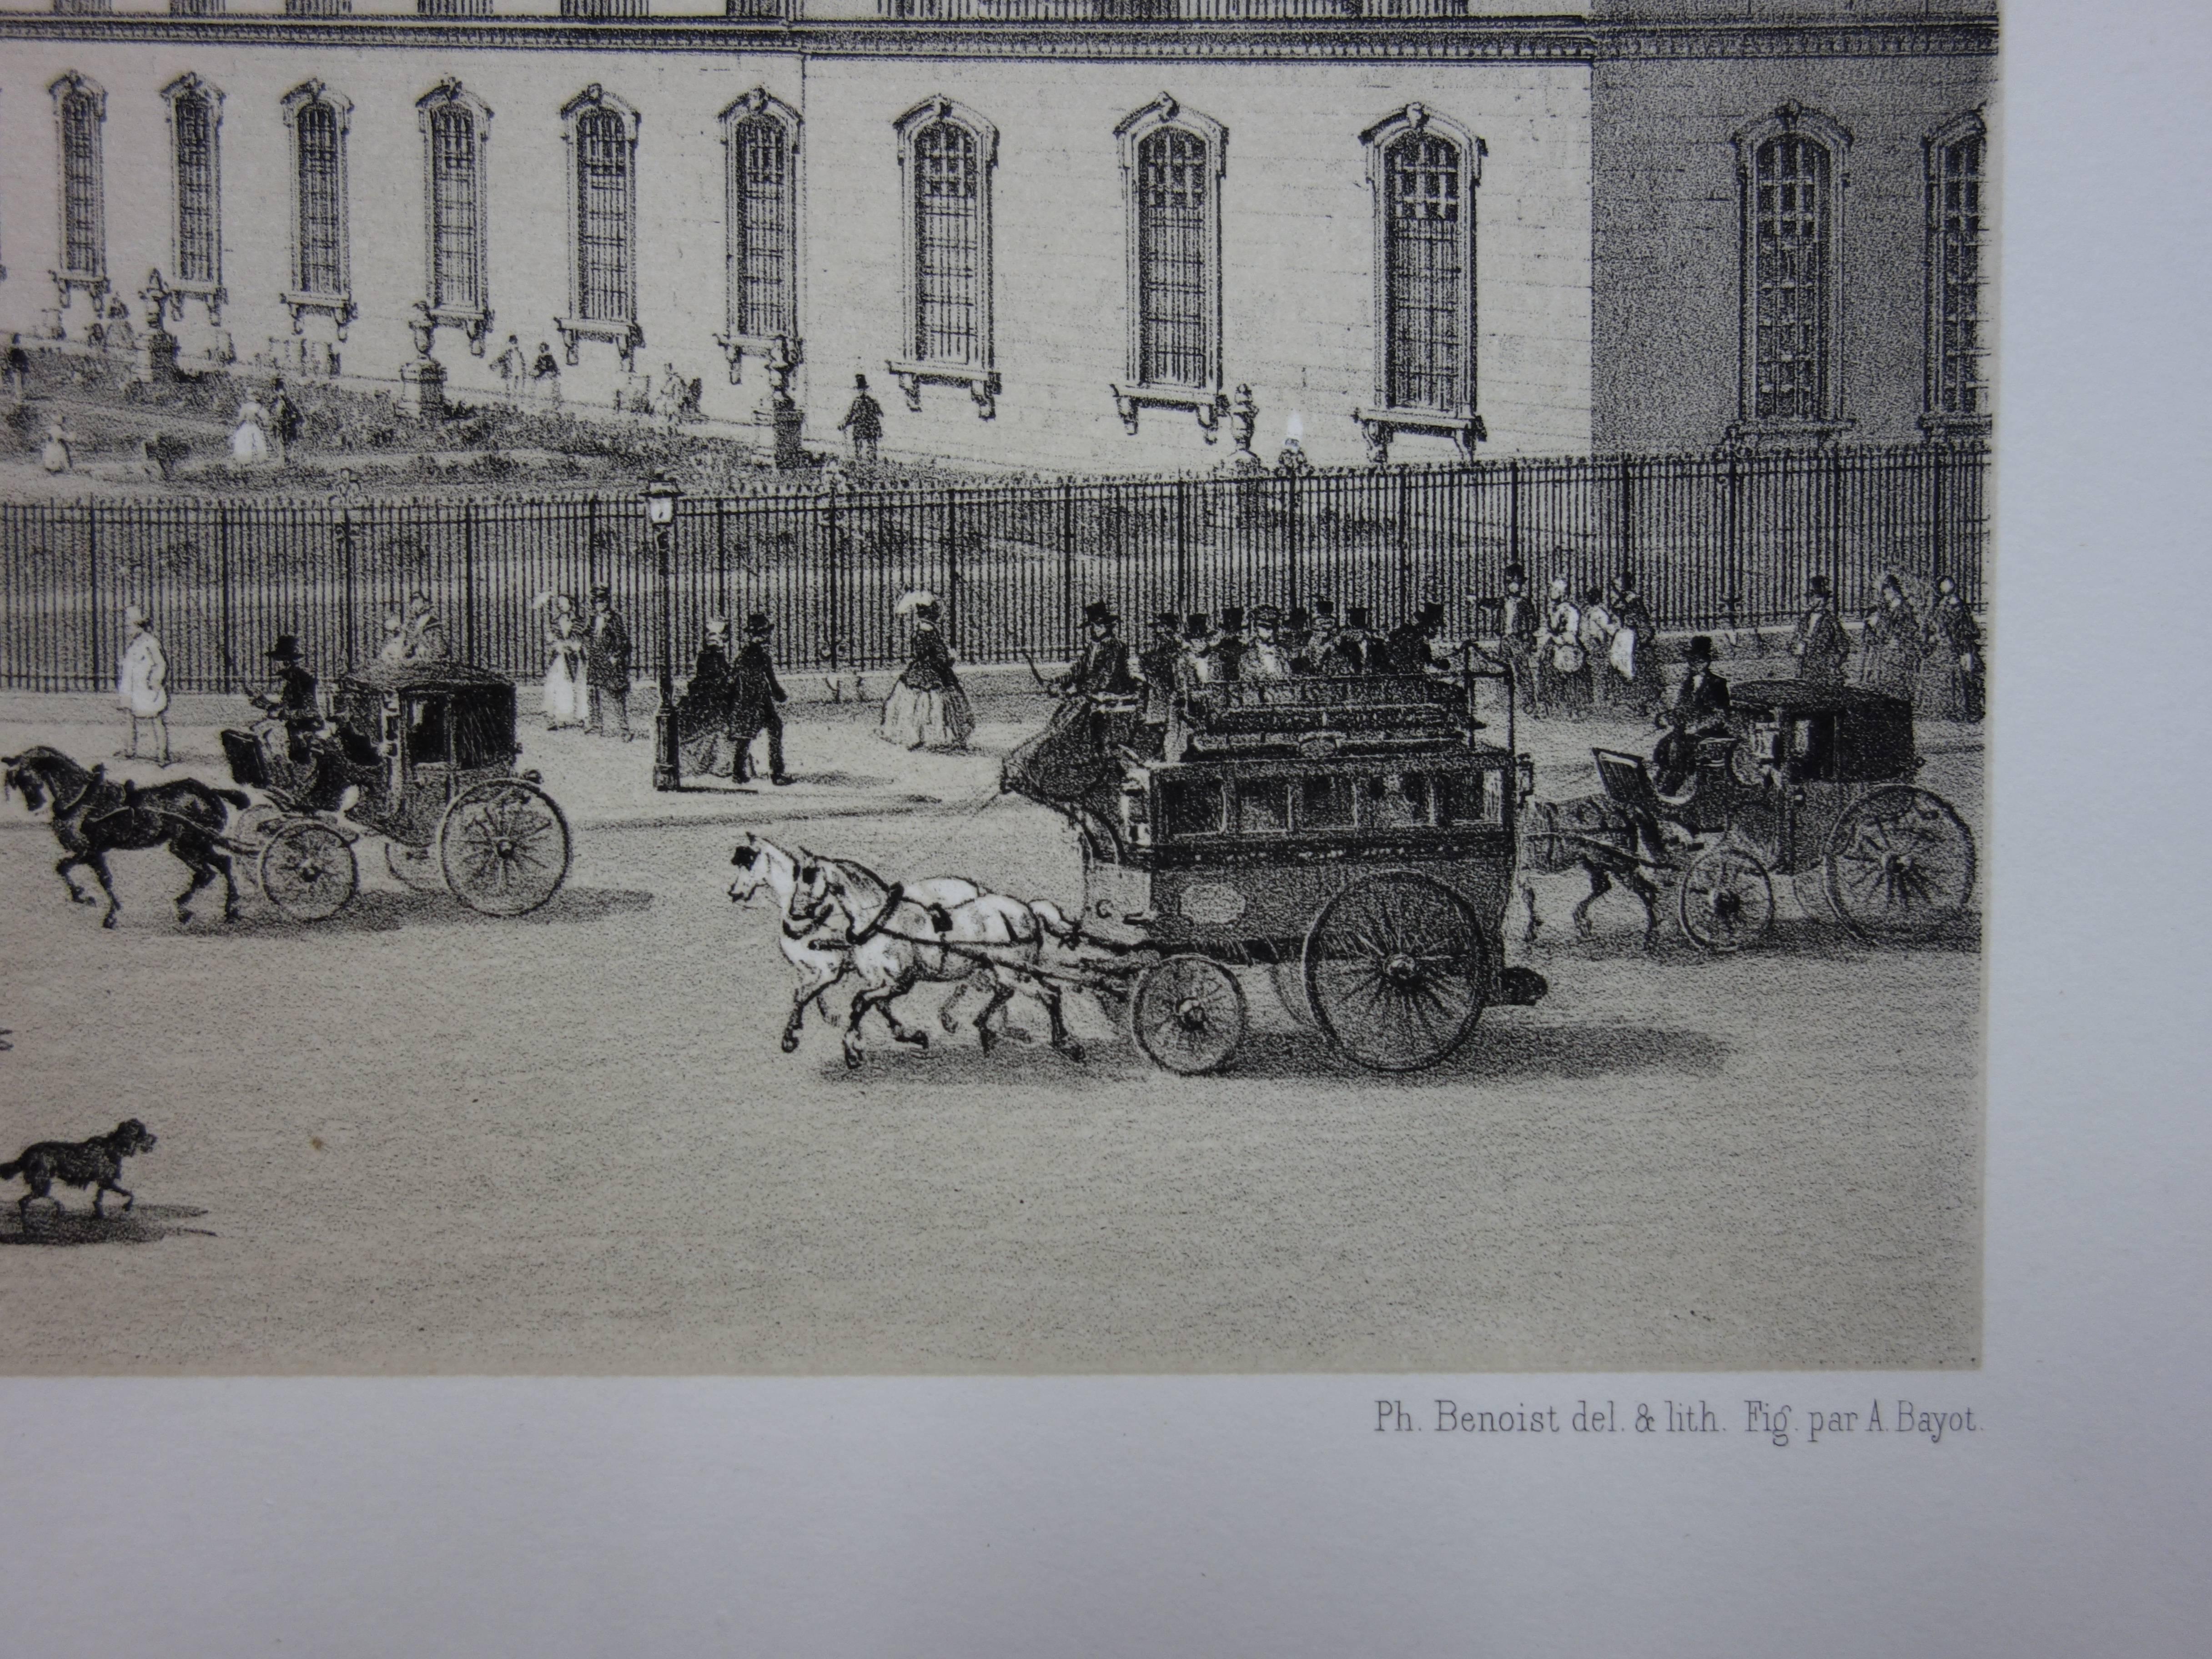 Philippe BENOIST
Paris : Back Door of Louvre Museum - 1861

Original two tones stone lithographs
Printed name of the artist bottom right
On vellum 33.5 x 49 cm (c. 13 x 20 inch)

Information : Edited in 1861 by Charpentier, this lithograph is part